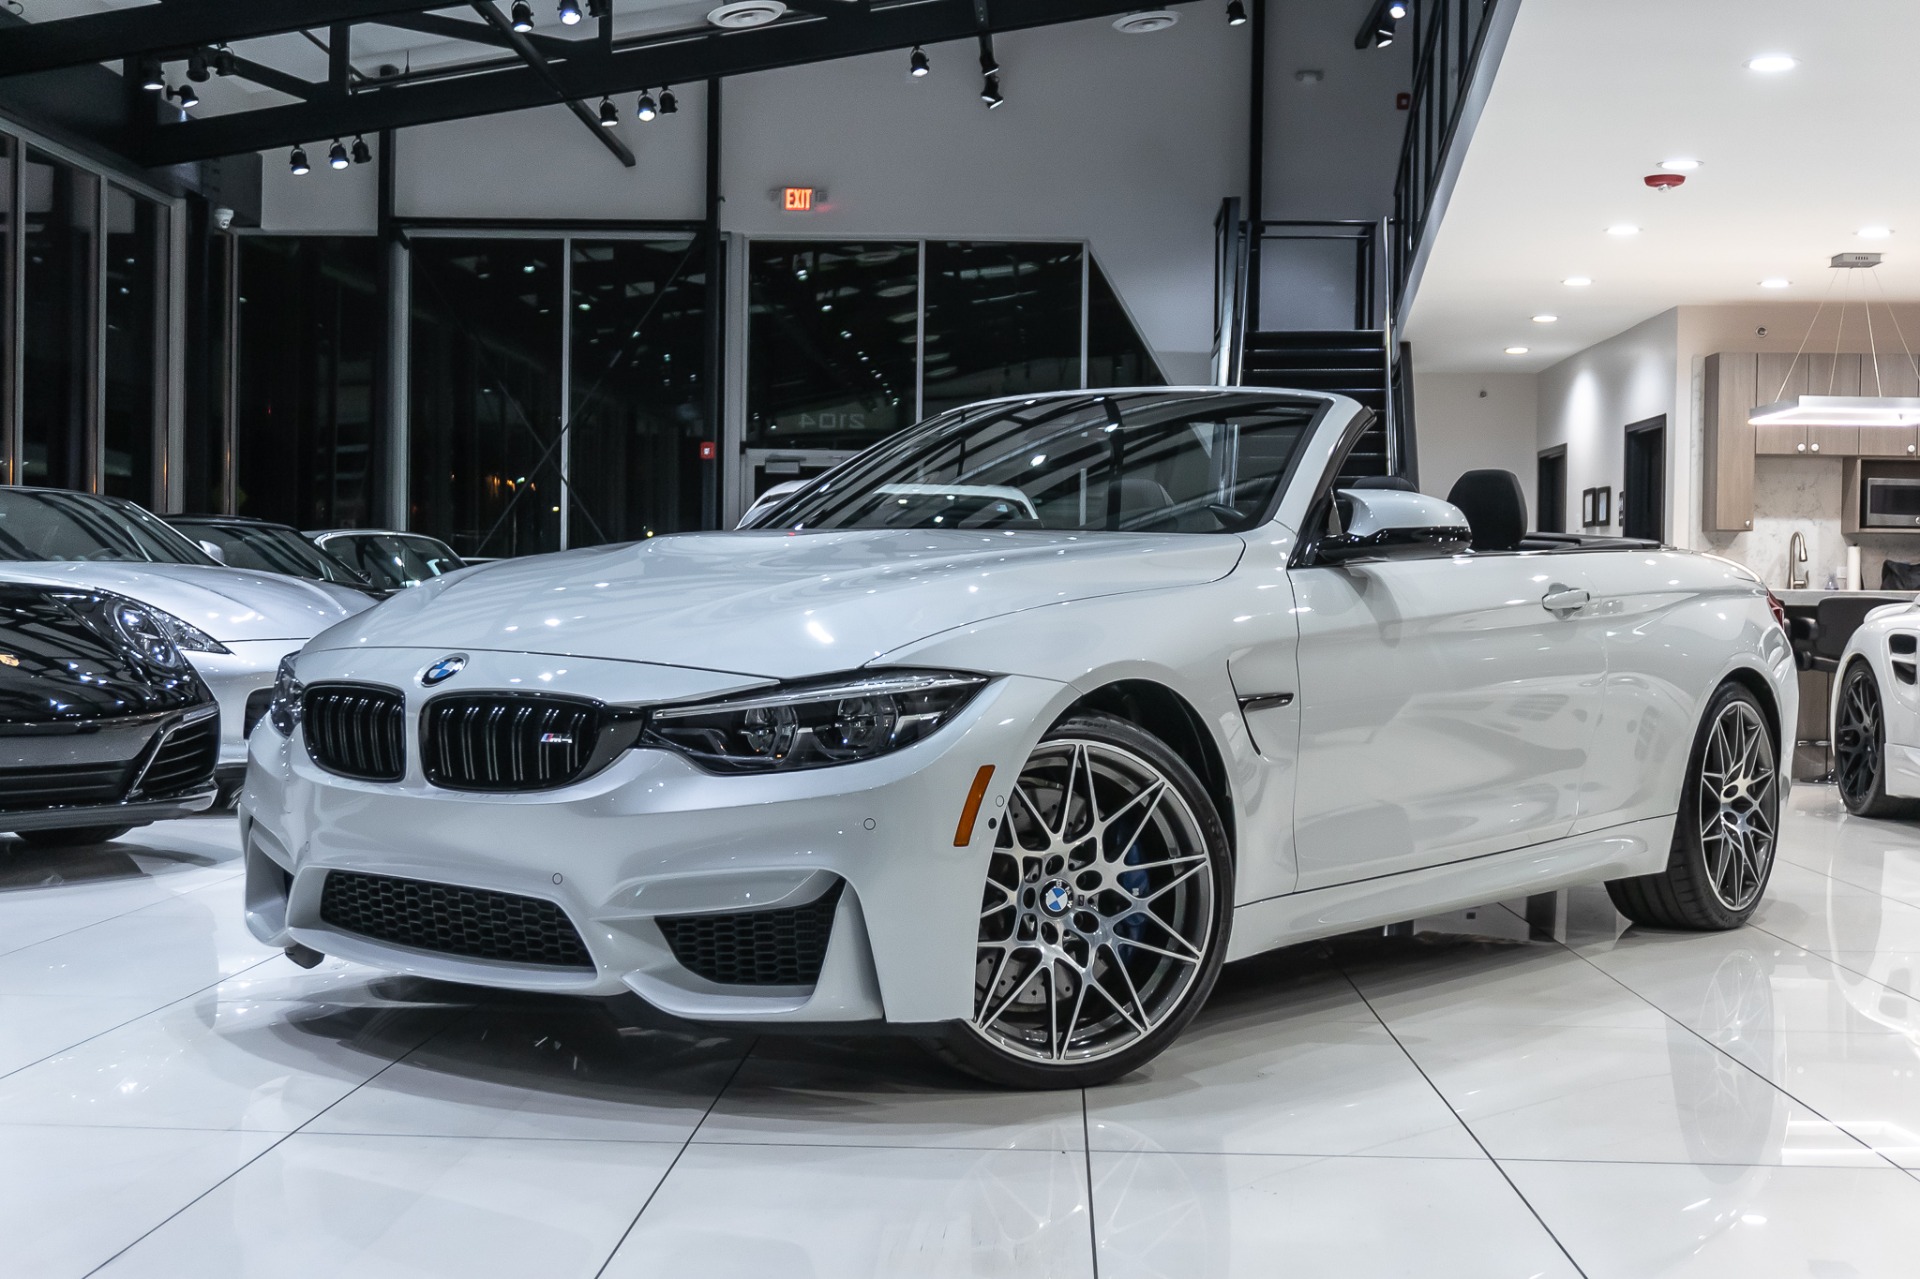 Used 2018 BMW M4 Convertible Competition Pkg + Executive Pkg $90k+ MSRP